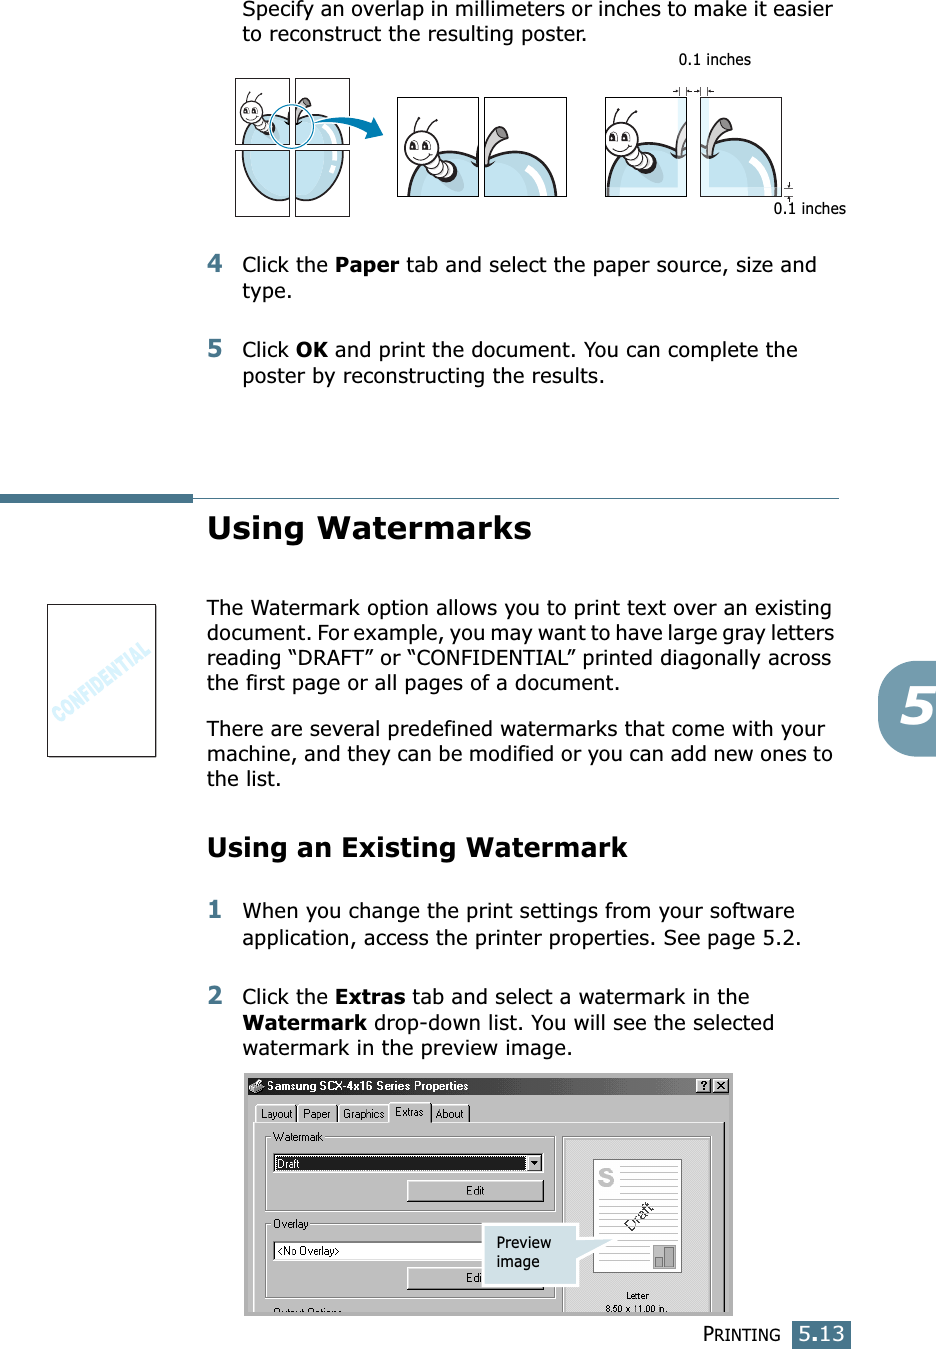 PRINTING5.135Specify an overlap in millimeters or inches to make it easier to reconstruct the resulting poster. 4Click the Paper tab and select the paper source, size and type.5Click OK and print the document. You can complete the poster by reconstructing the results. Using WatermarksThe Watermark option allows you to print text over an existing document. For example, you may want to have large gray letters reading “DRAFT” or “CONFIDENTIAL” printed diagonally across the first page or all pages of a document. There are several predefined watermarks that come with your machine, and they can be modified or you can add new ones to the list. Using an Existing Watermark1When you change the print settings from your software application, access the printer properties. See page 5.2. 2Click the Extras tab and select a watermark in the Watermark drop-down list. You will see the selected watermark in the preview image. 0.1 inches0.1 inchesPreview image